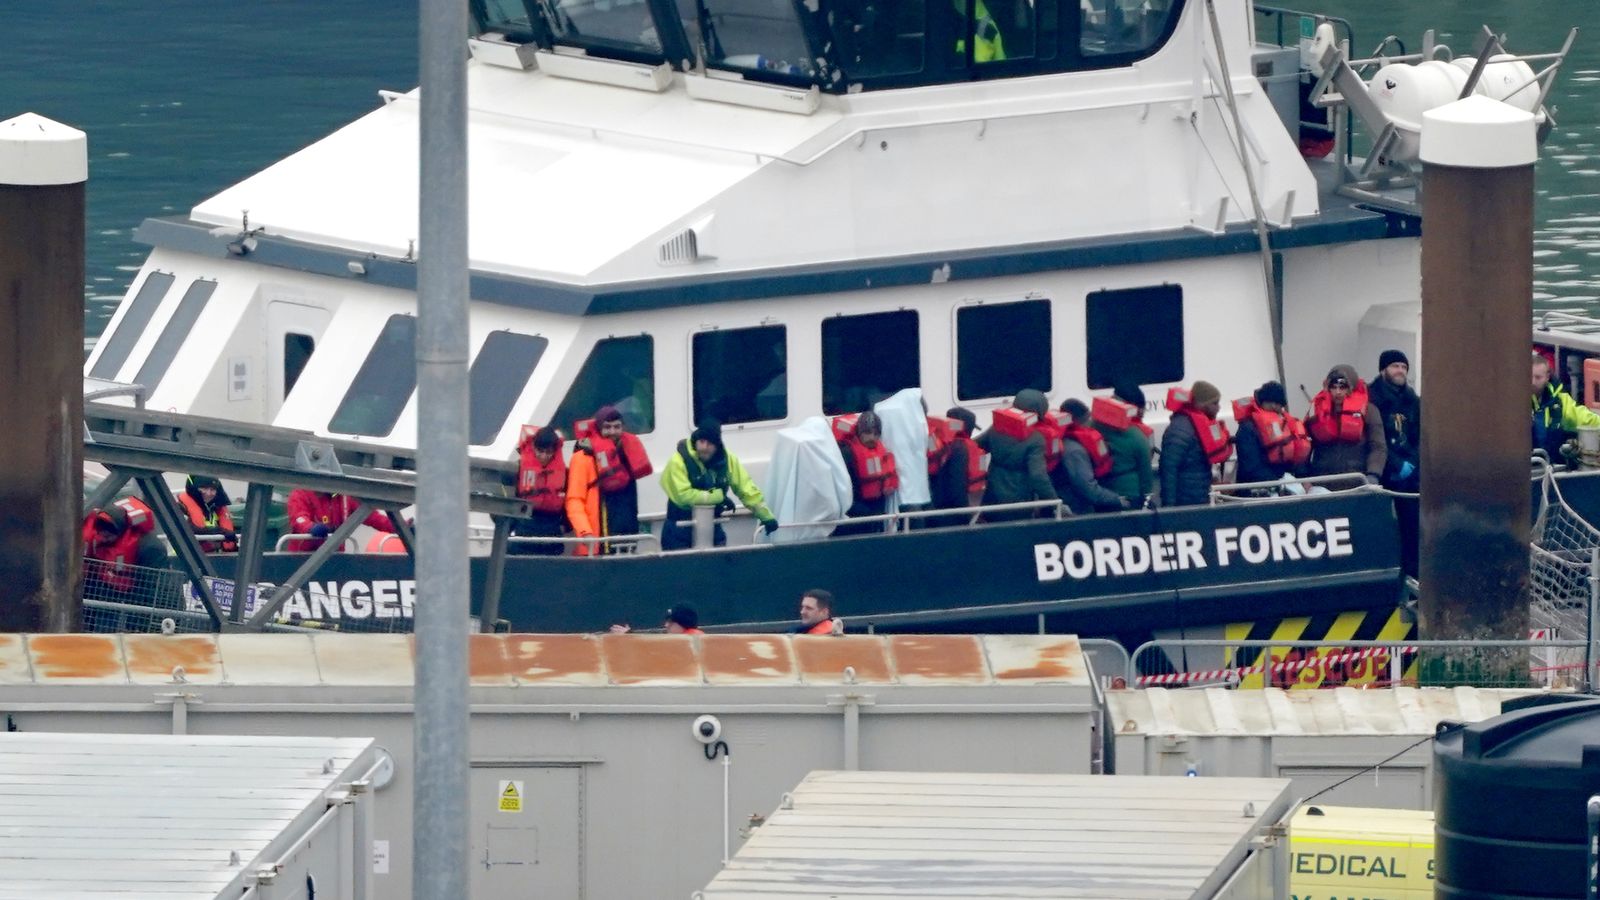 Around 500 migrants crossed Channel to UK today